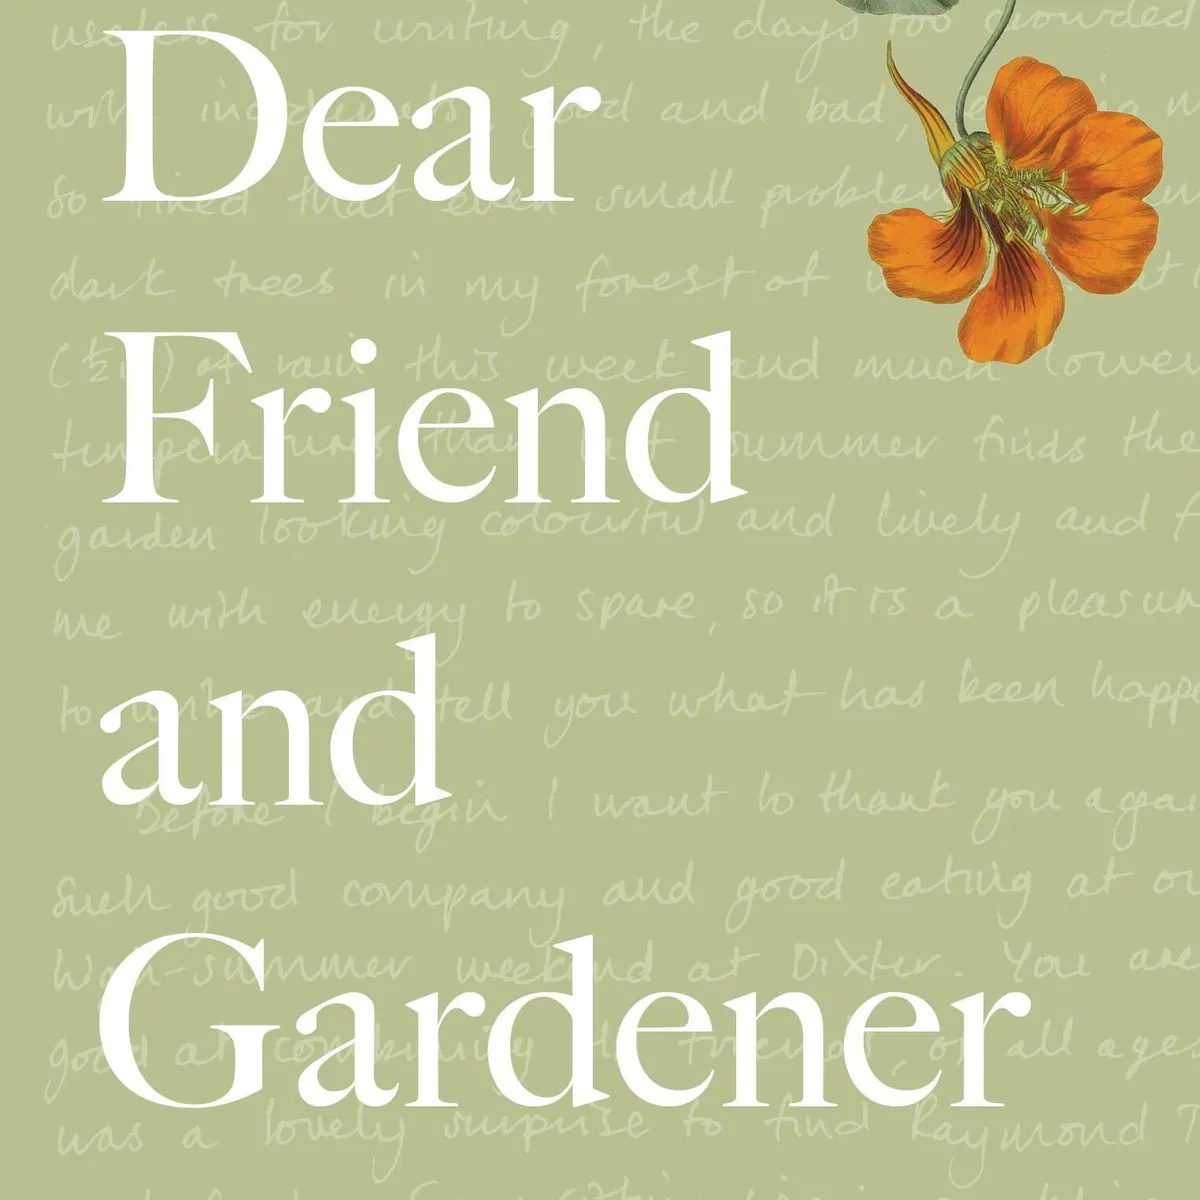 Dear Friend and Gardener by Christopher Lloyd and Beth Chatto